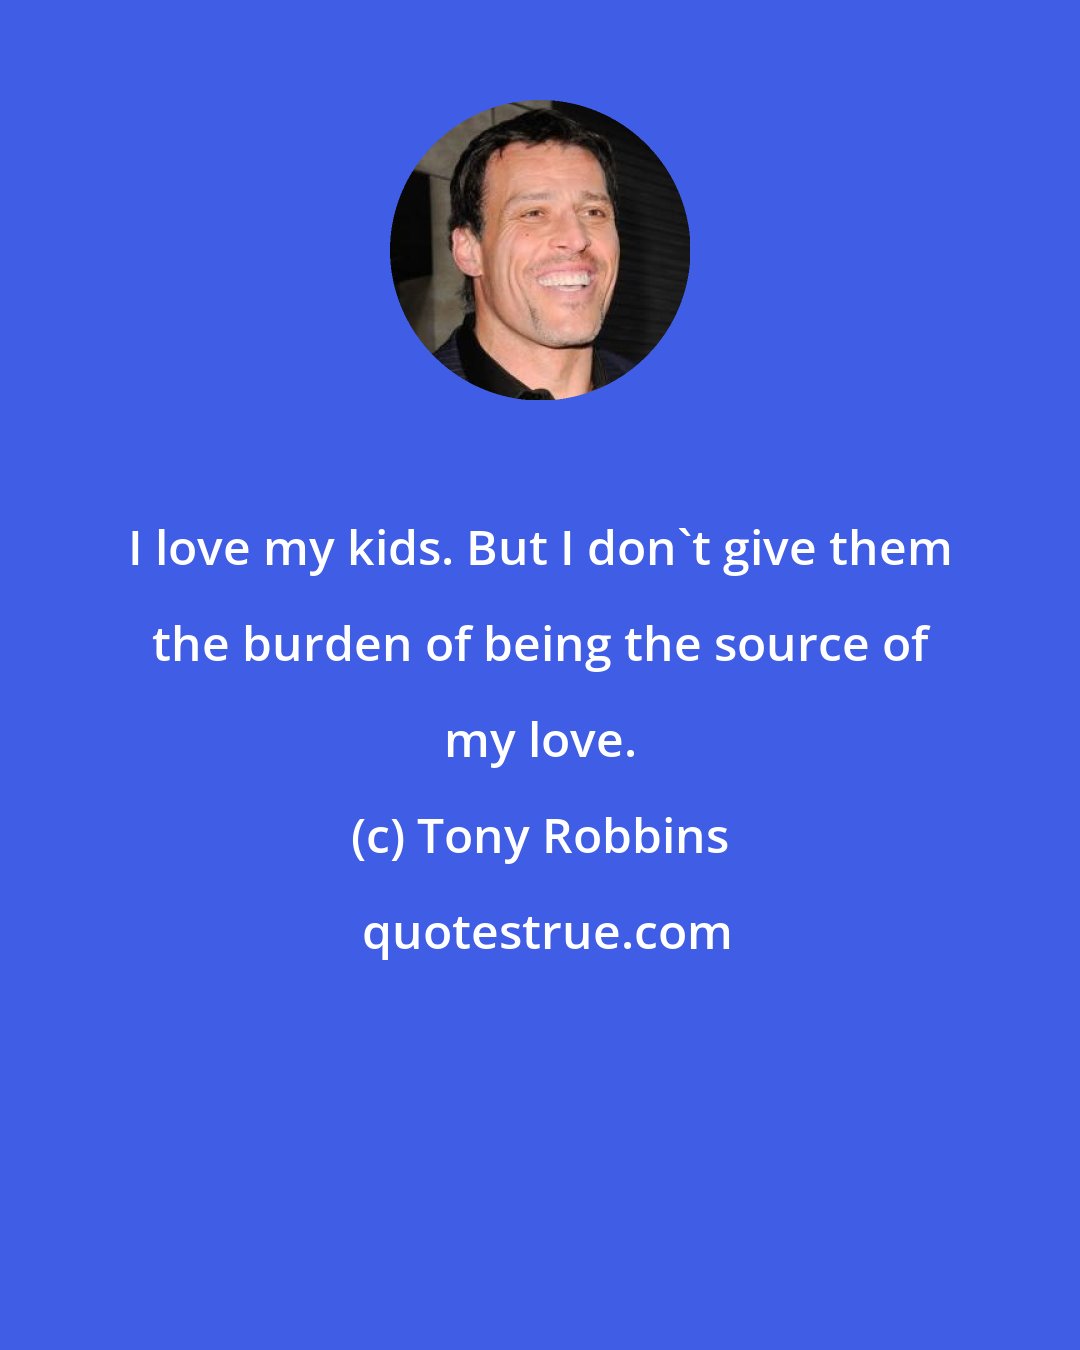 Tony Robbins: I love my kids. But I don't give them the burden of being the source of my love.